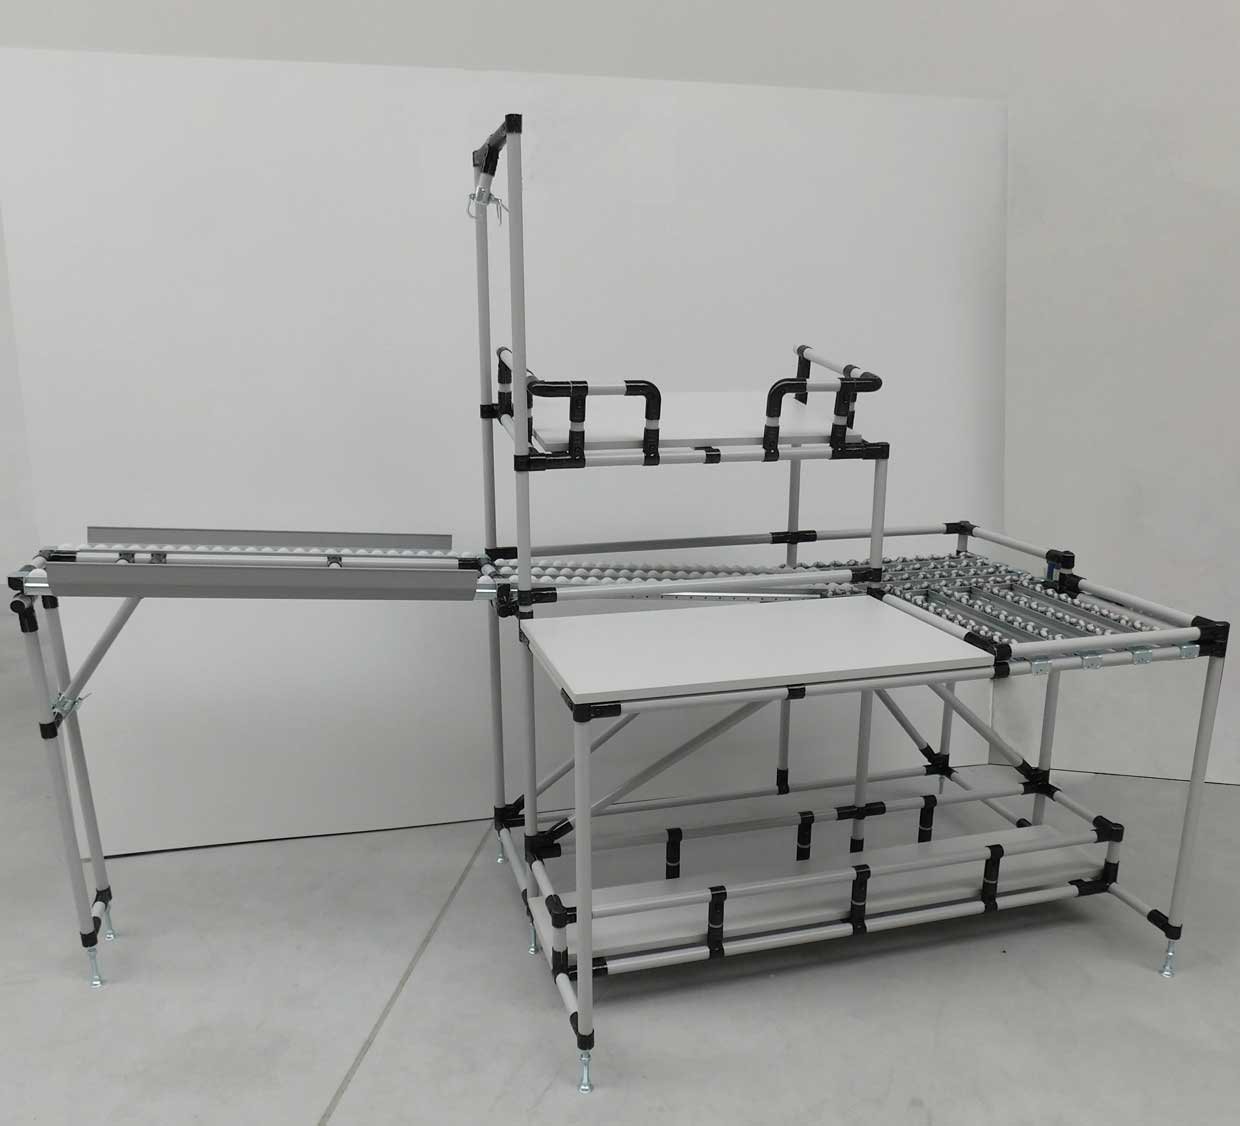 Flow rack as integrated material supply at the workstation with corner solution